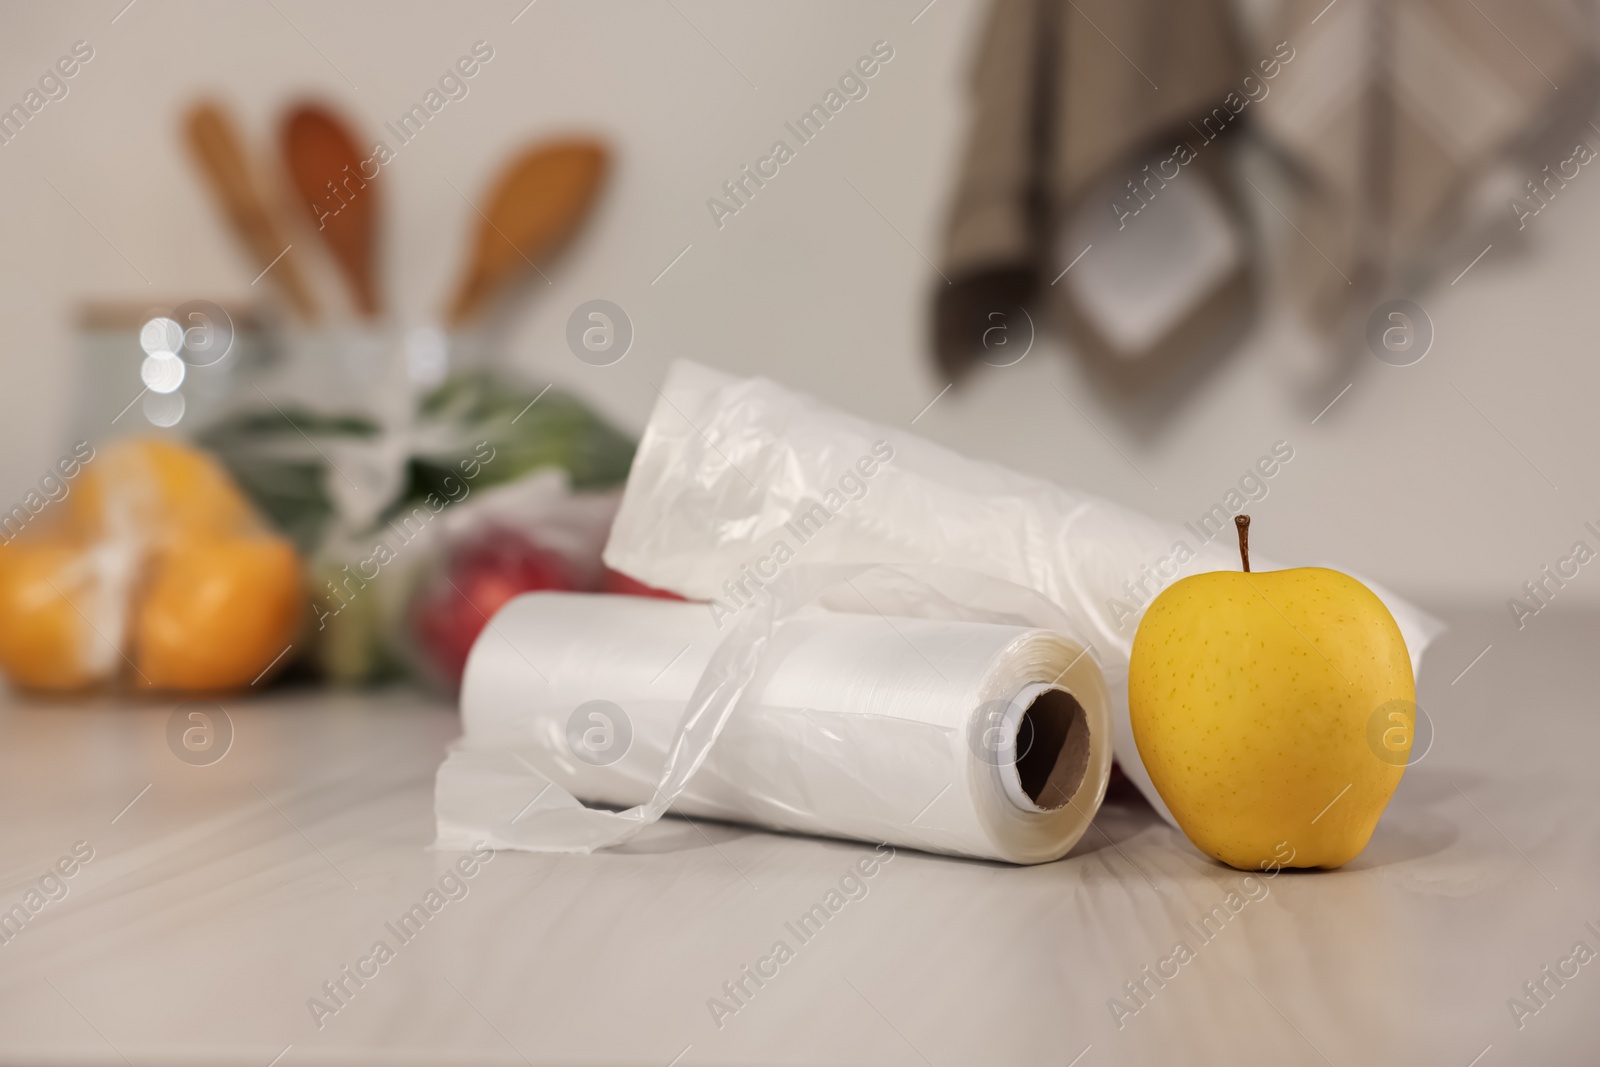 Photo of Rolls of plastic bags and fresh apple on white table